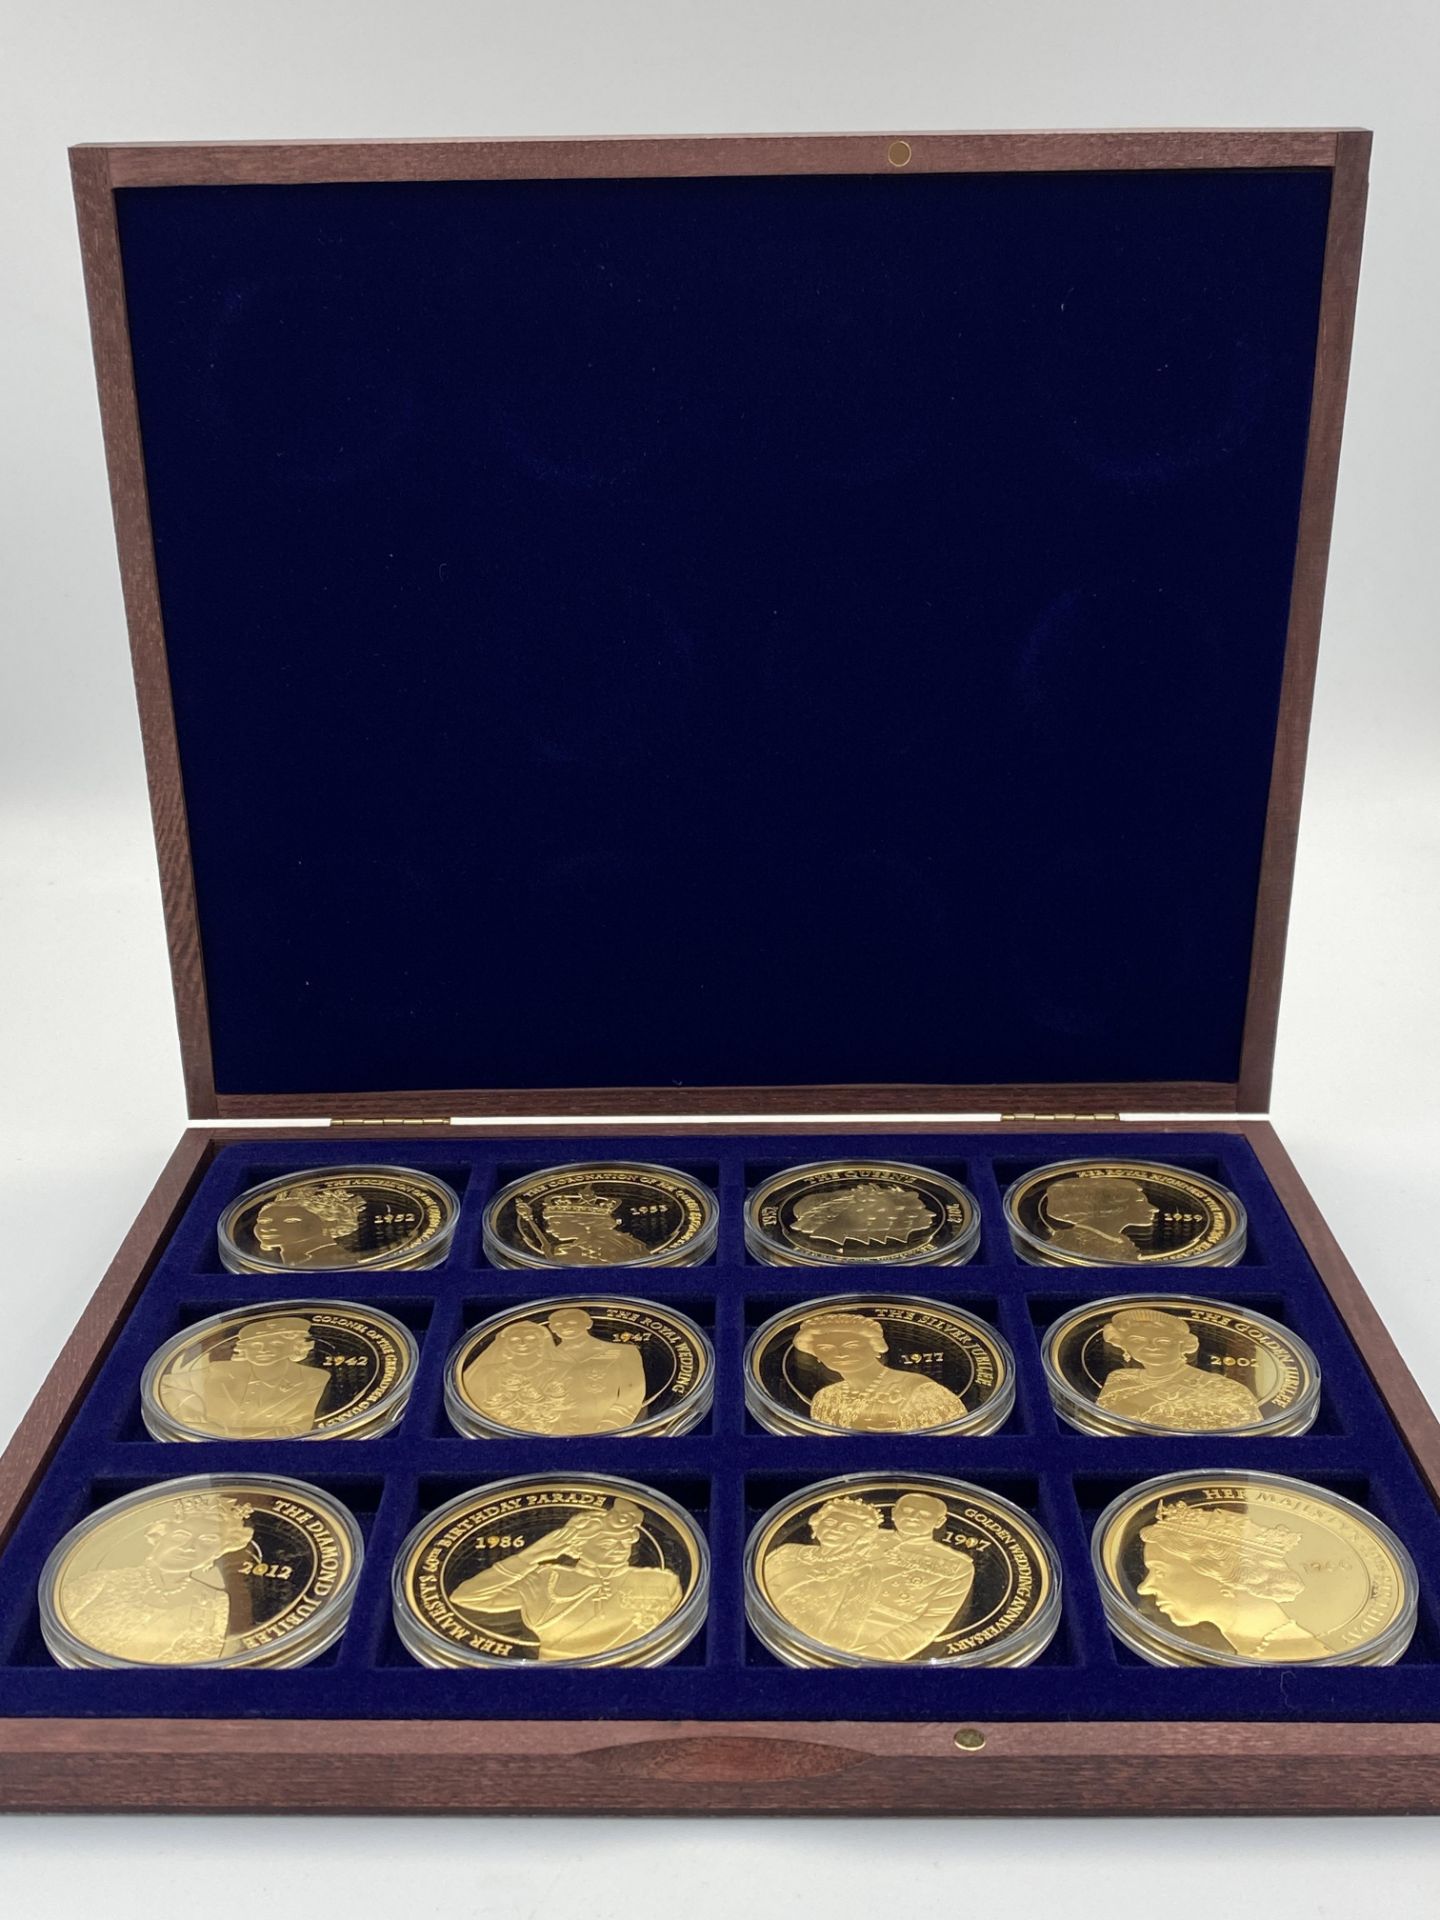 Twelve gold plated Portraits of the Queen Diamond Jubilee coins in presentation box - Image 2 of 6